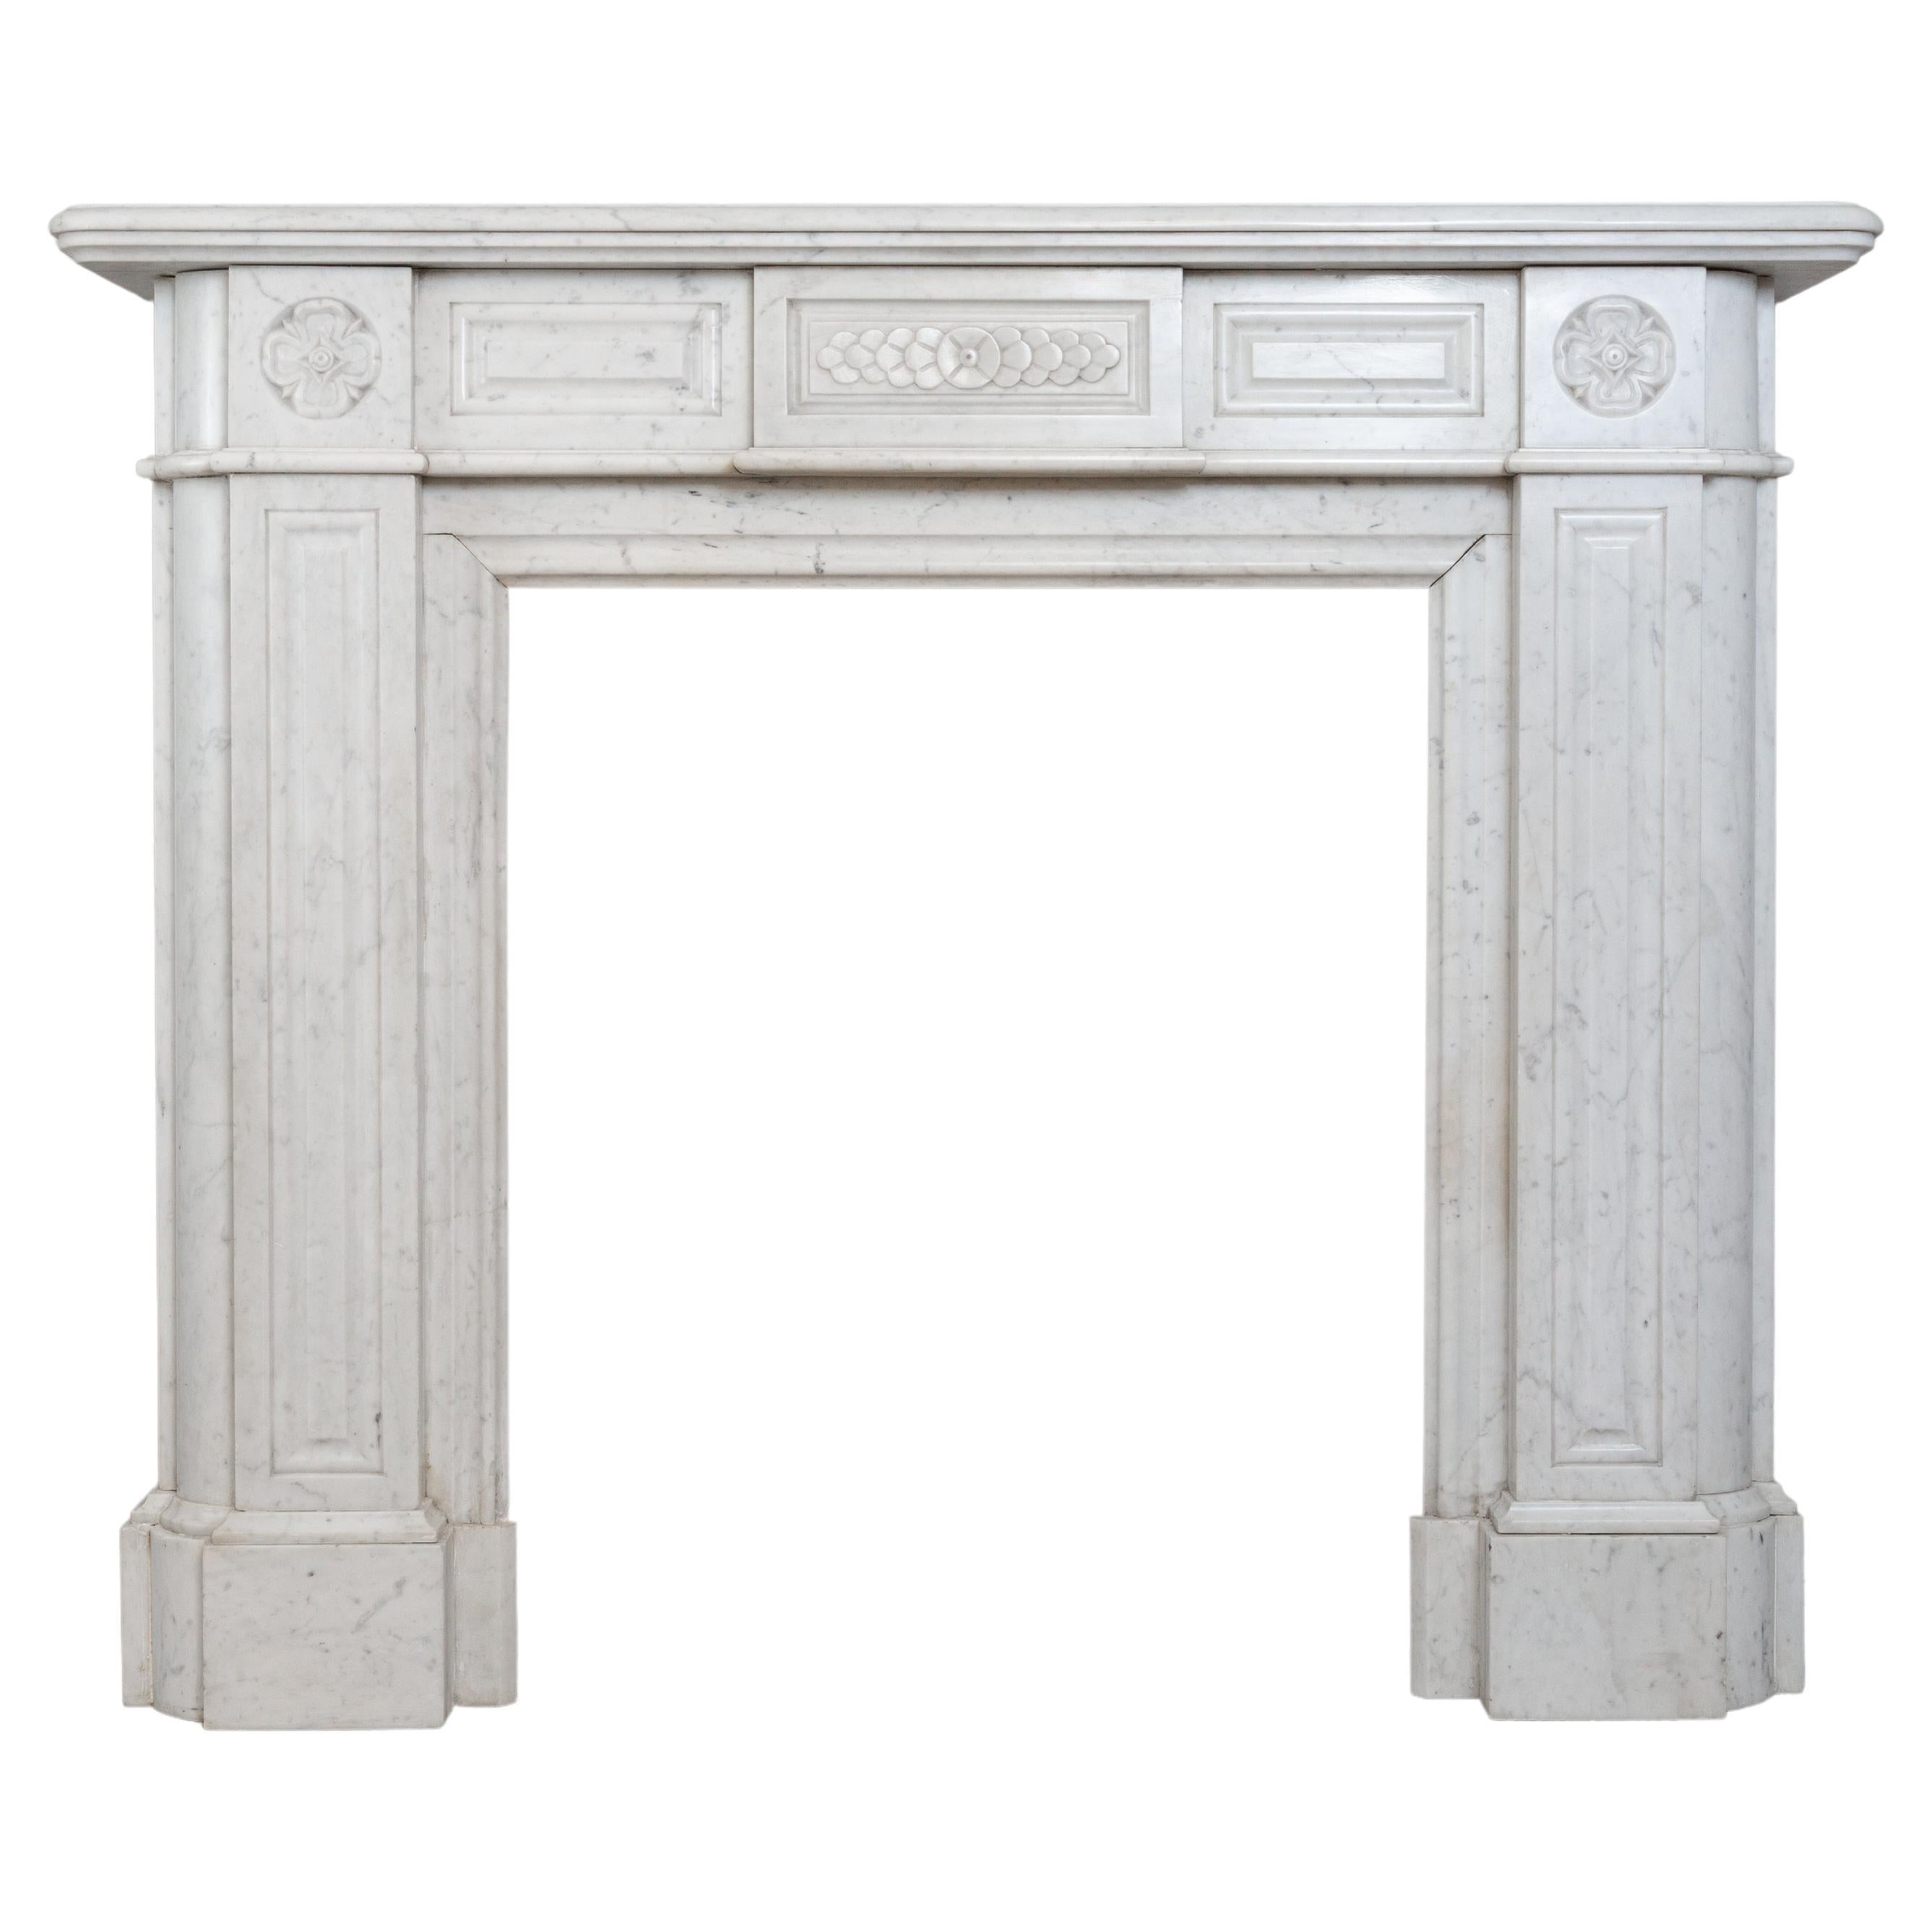 Beautiful French Carrara Marble Antique Marble Neoclassical Fireplace Surround